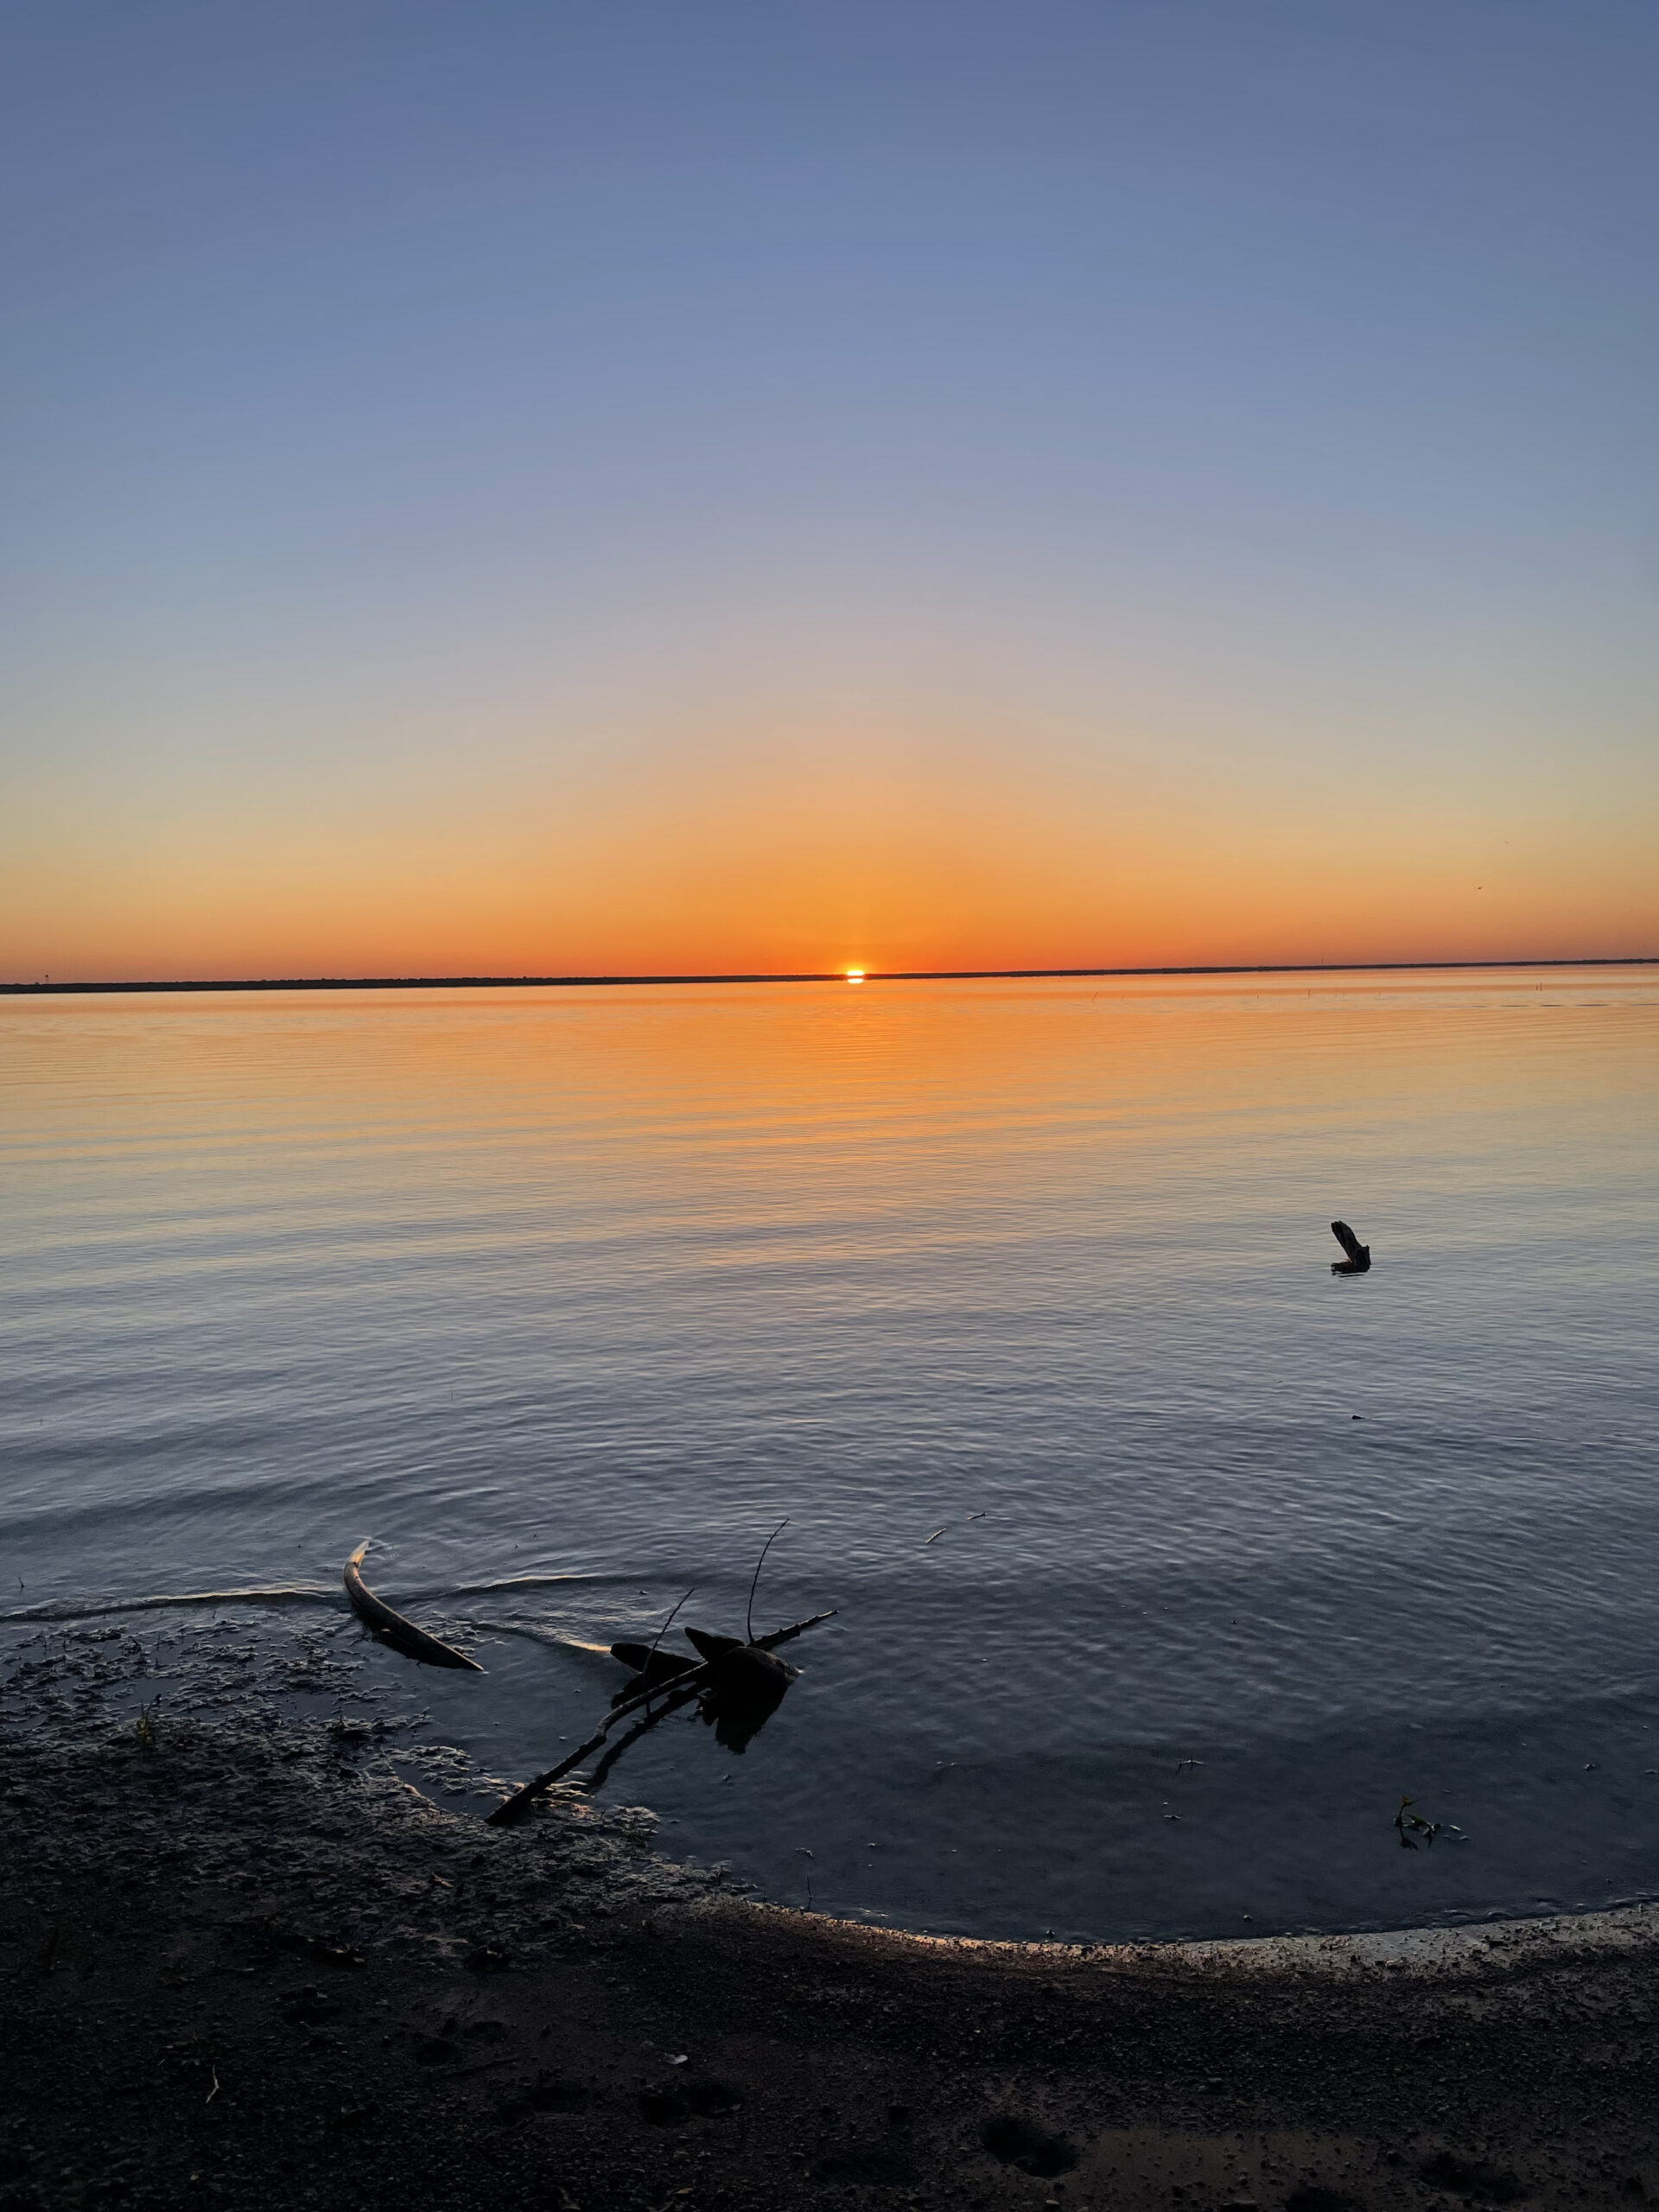 A tiny dot of a yellow sun sits on the horizon. The sky and water just above and below it are awash with bright orange. The sky fades from orange to yellow to blue above. The sandy shoreline is seen nearby.